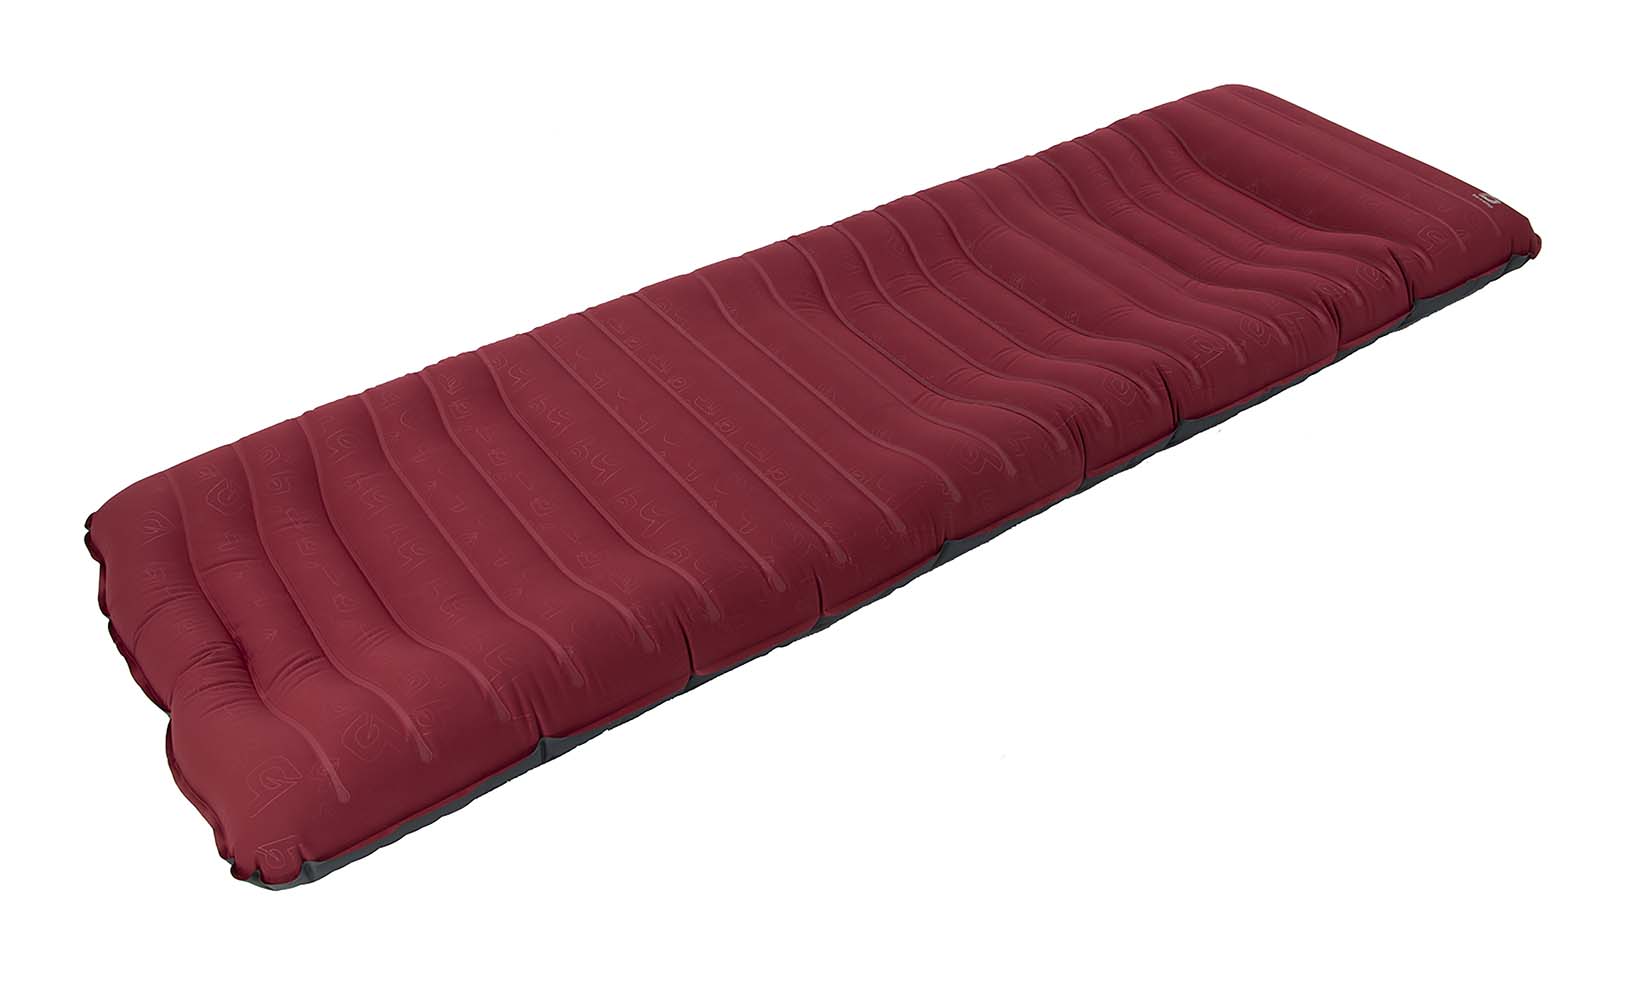 3107105 A very luxurious and compact air mattress. Top quality airbed that is extra comfortable due to the ergonomic pressure distribution. Very lightweight and compact which makes the air mattress easy to take with you. With double valve so that the airbed is quickly inflated and deflated again. Furthermore, this airbed has an elastic top and comes with a handy carrying bag.